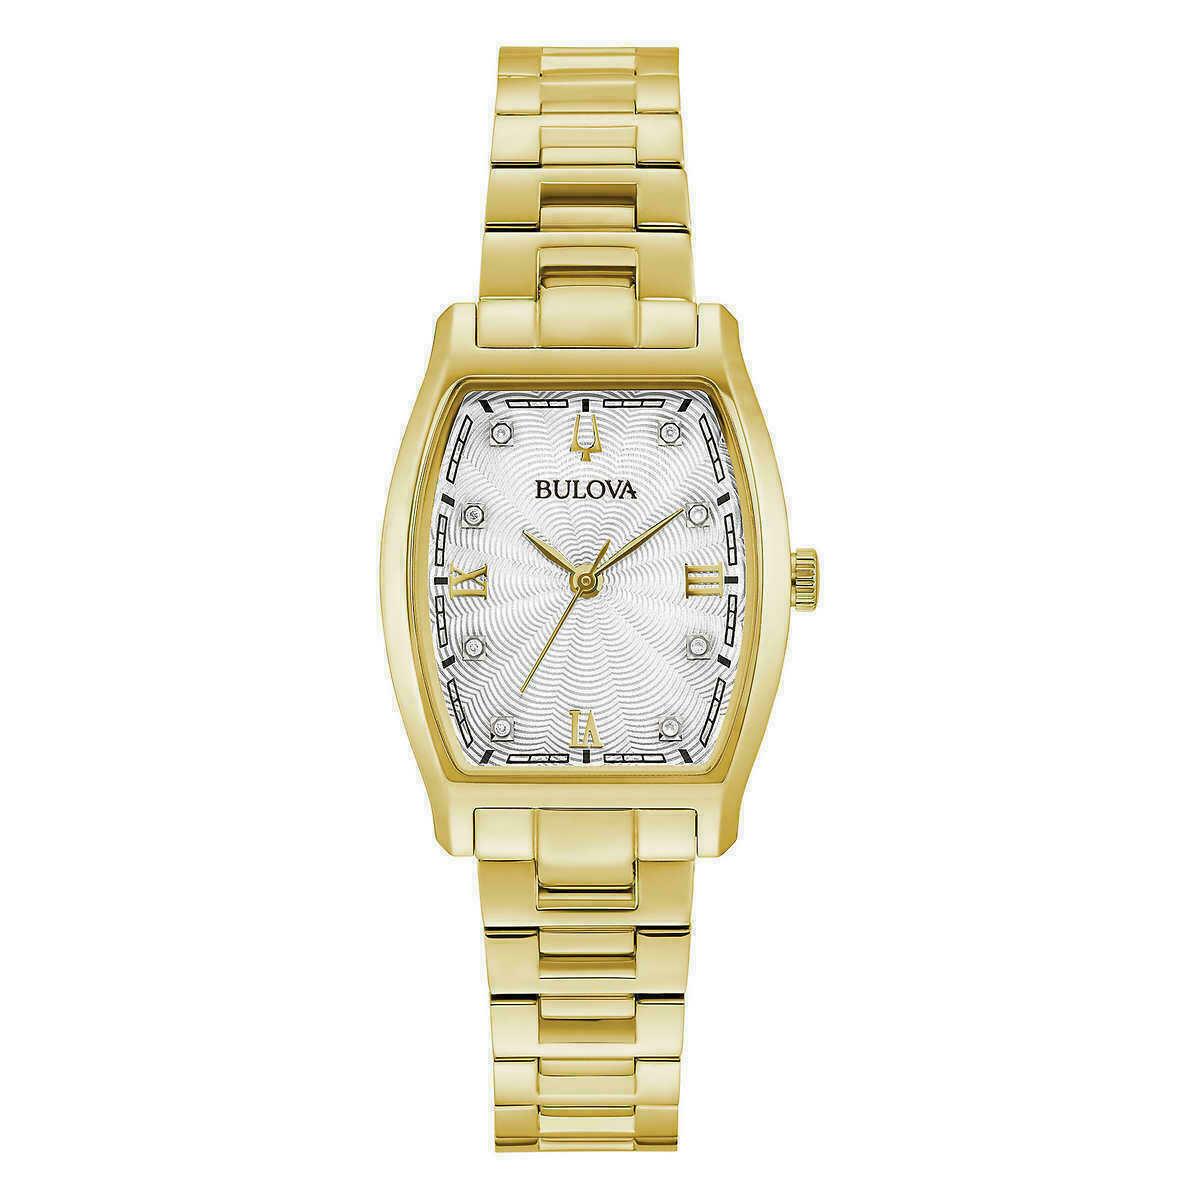 Bulova 97P148 Tonneau Diamond Accented Stainless Gold Tone Women`s Watch - Silver Dial, Gold Band